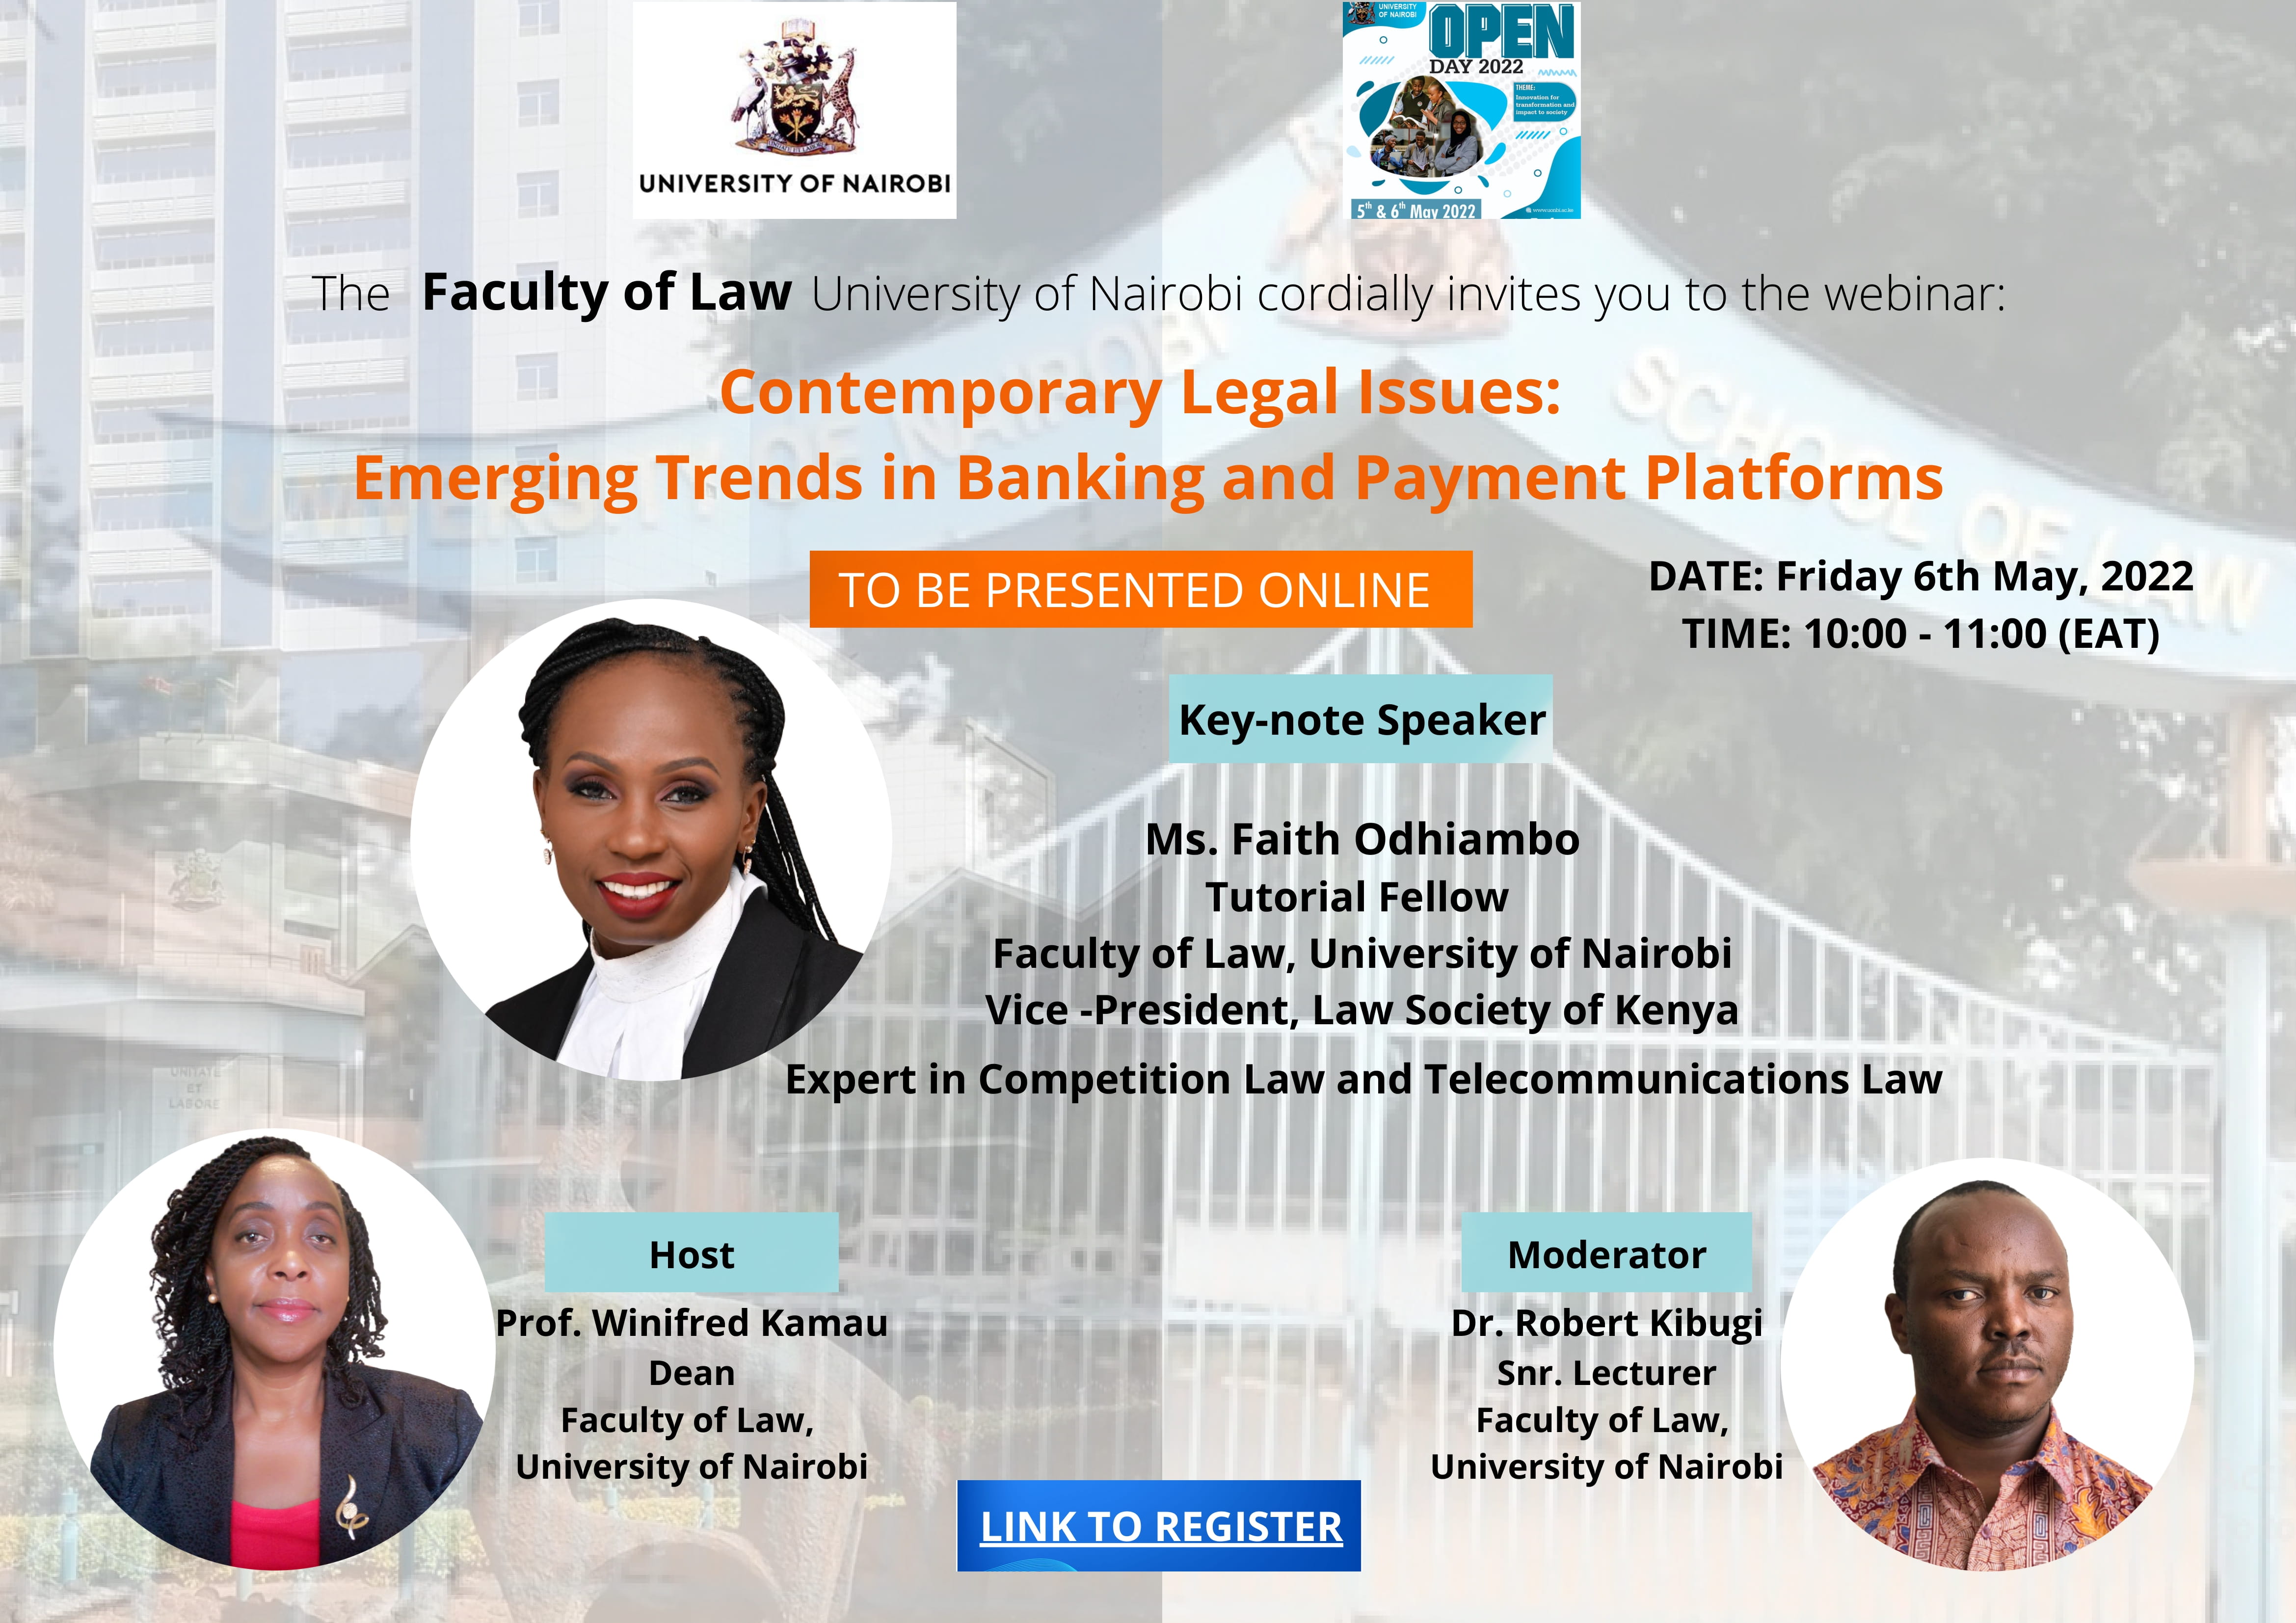 webinar on Contemporary Legal Issues: Emerging Trends in Banking and Payment Platforms